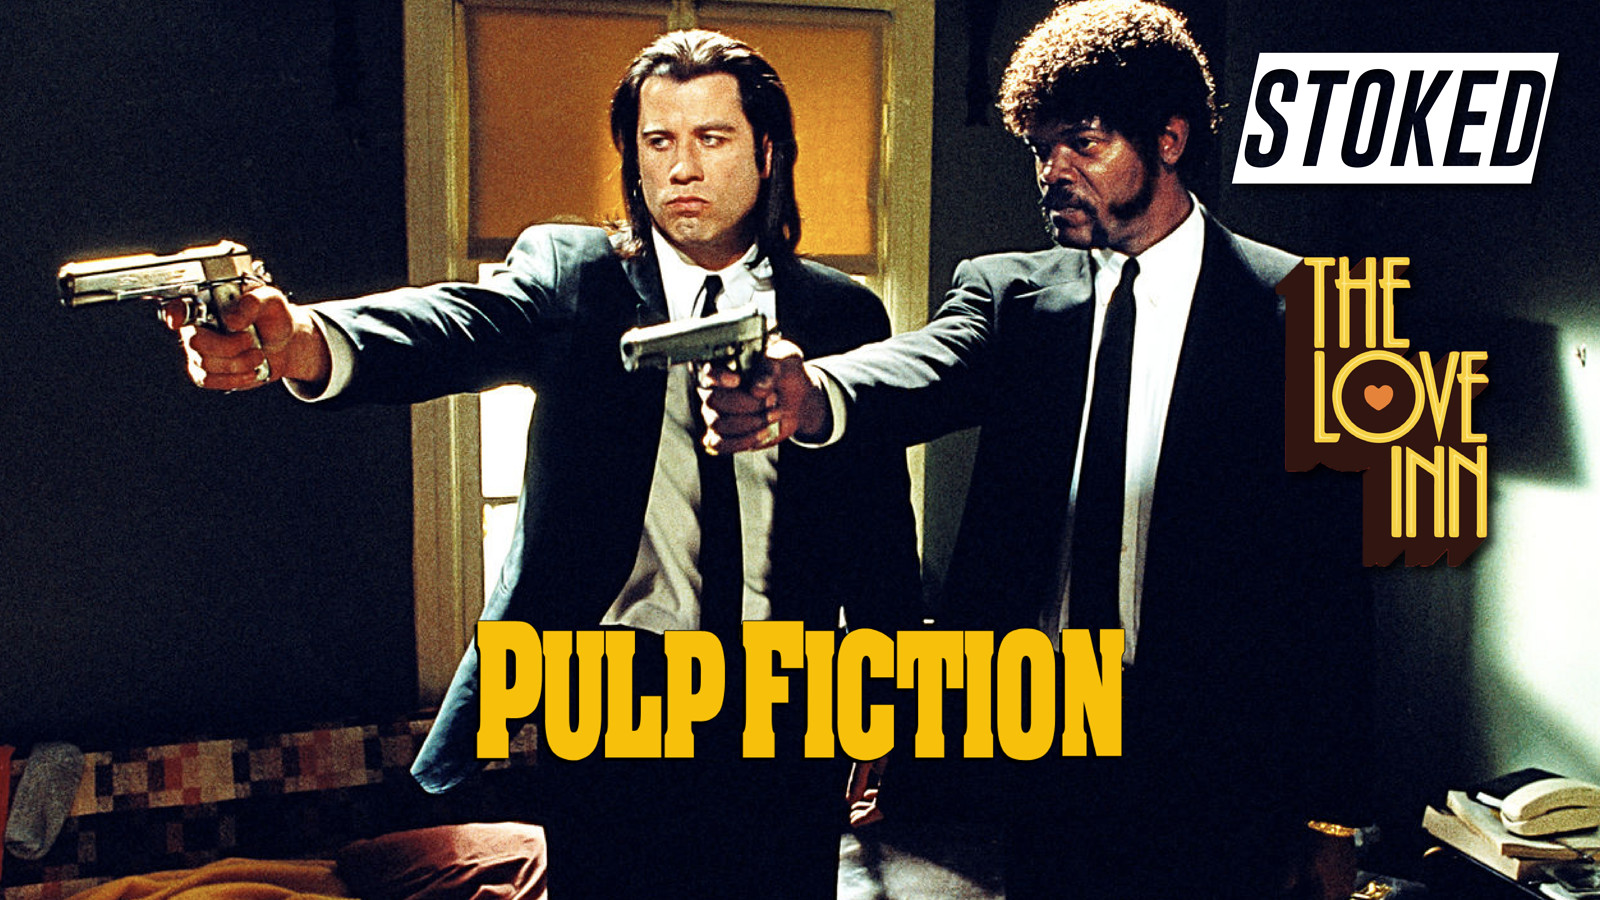 Stoked: A Night of Pulp Fiction at The Love Inn